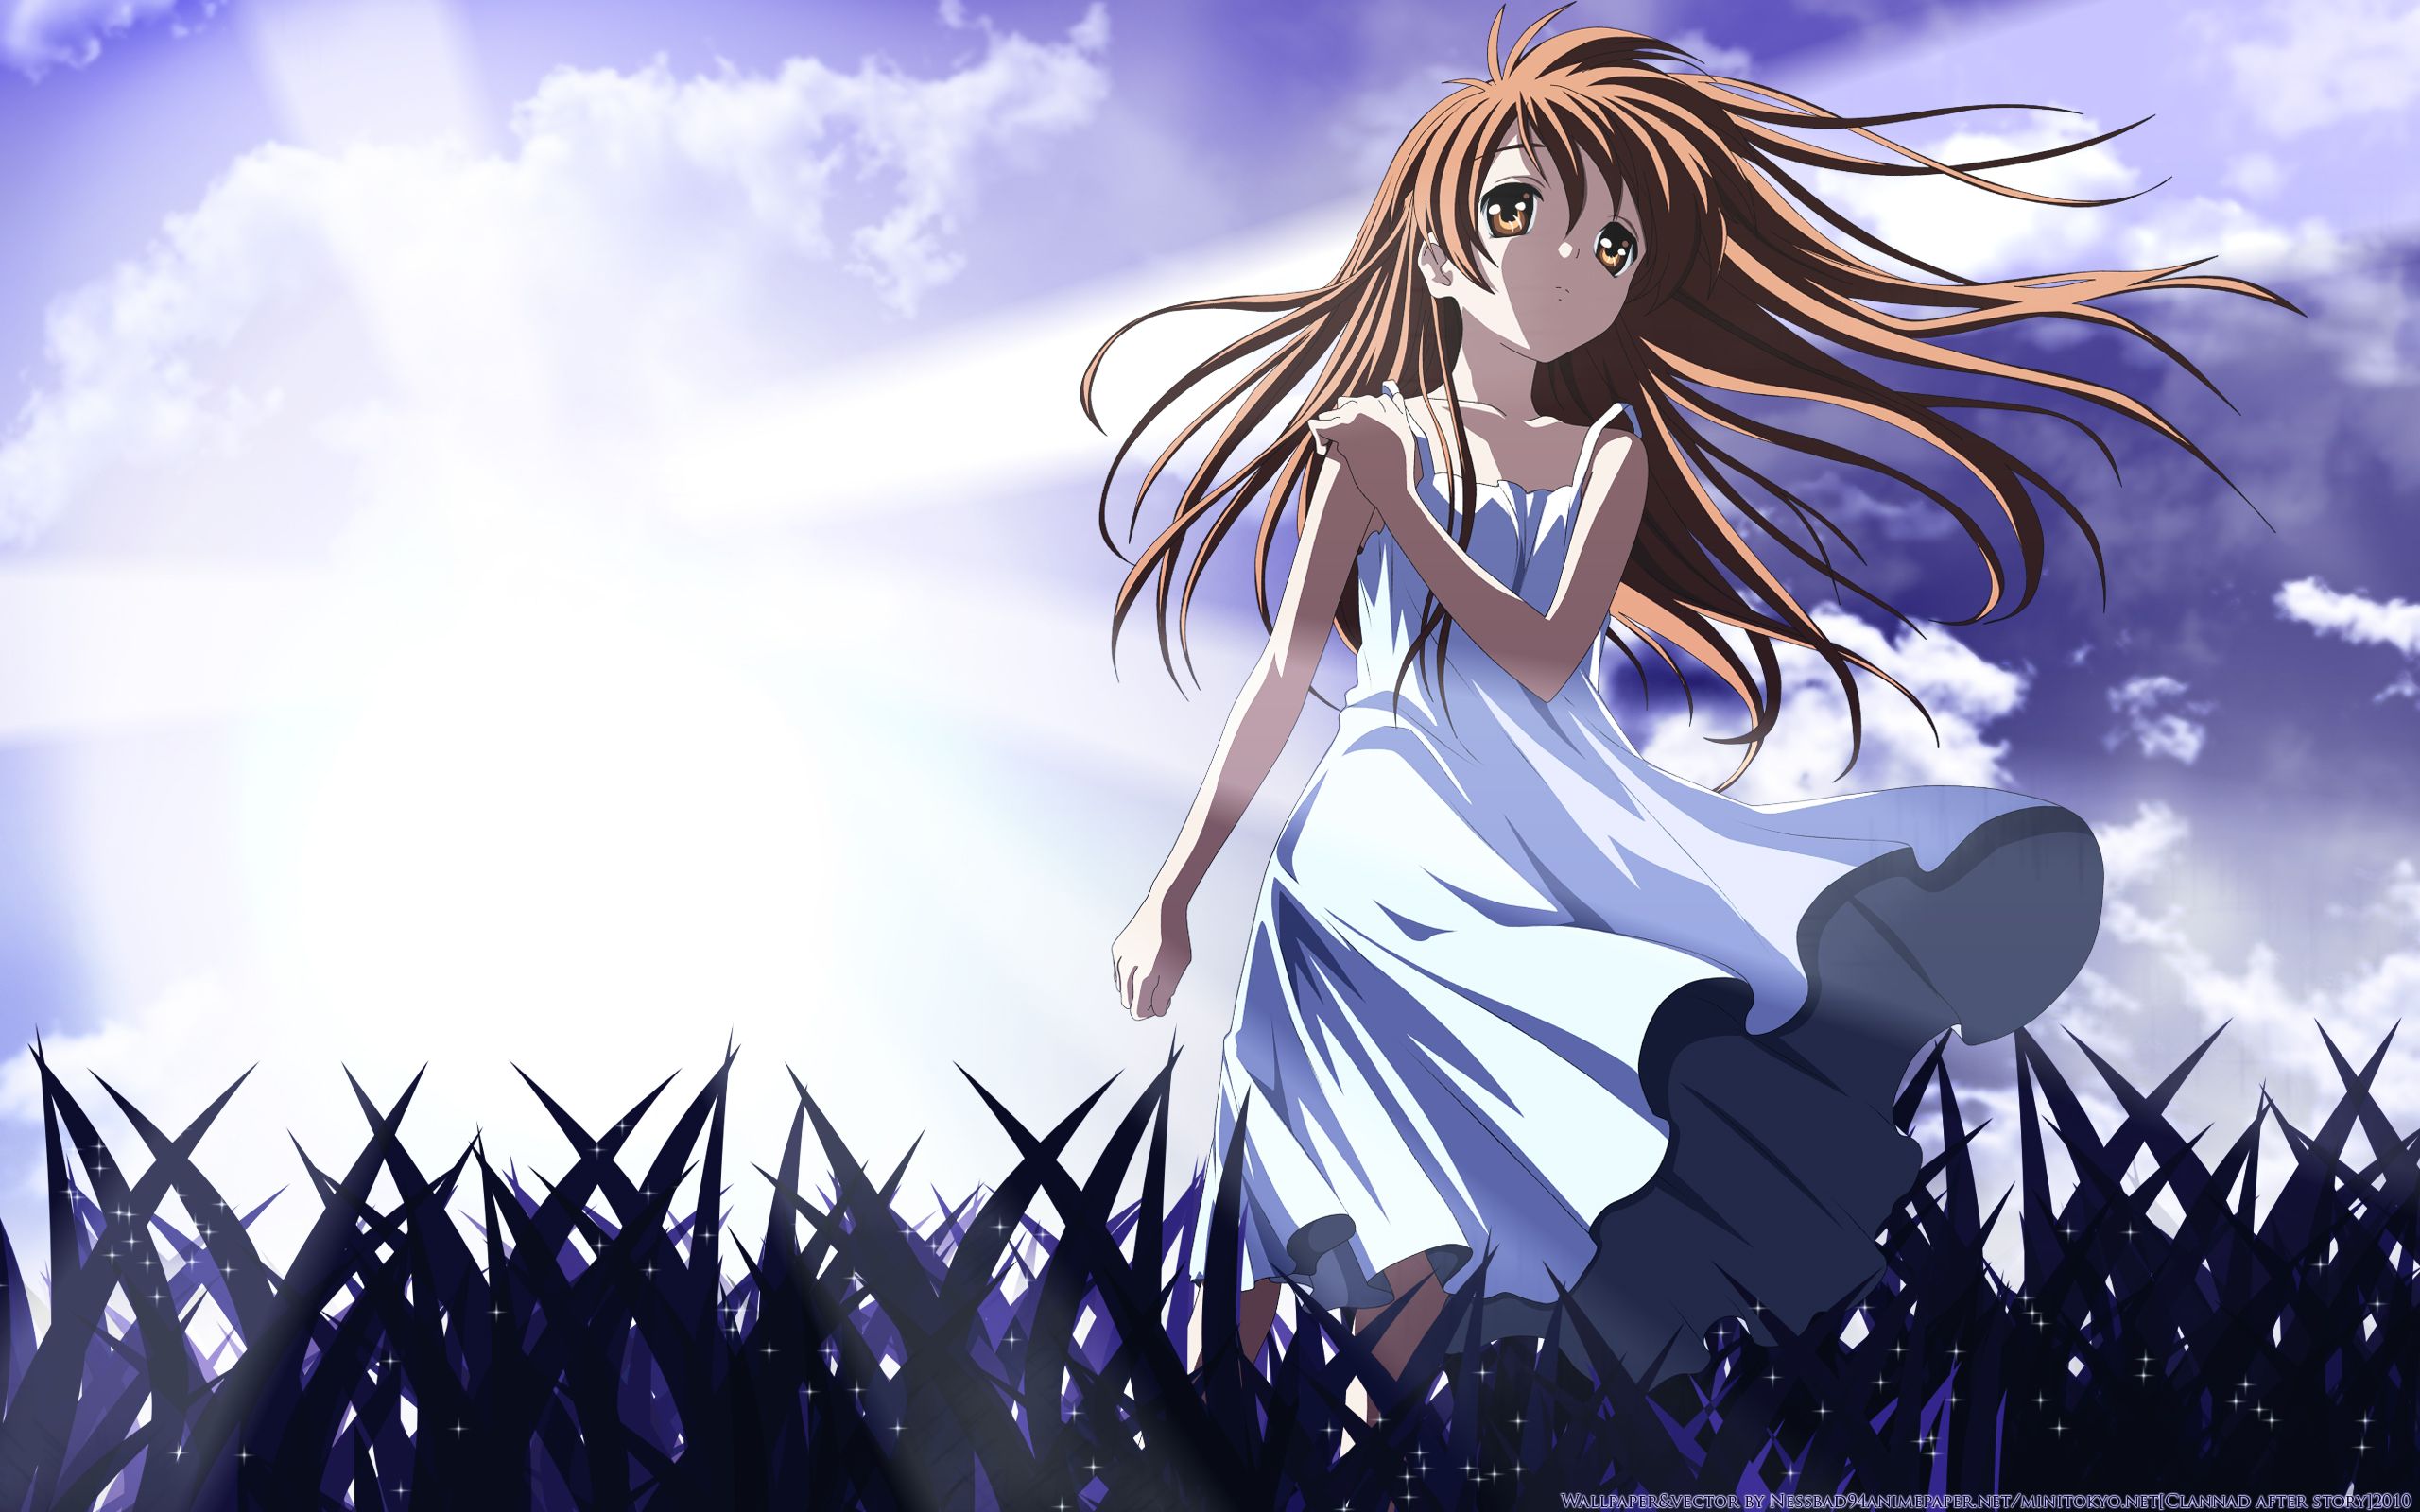 Free download Download Clannad Anime Wallpaper 2560x1600 Full HD